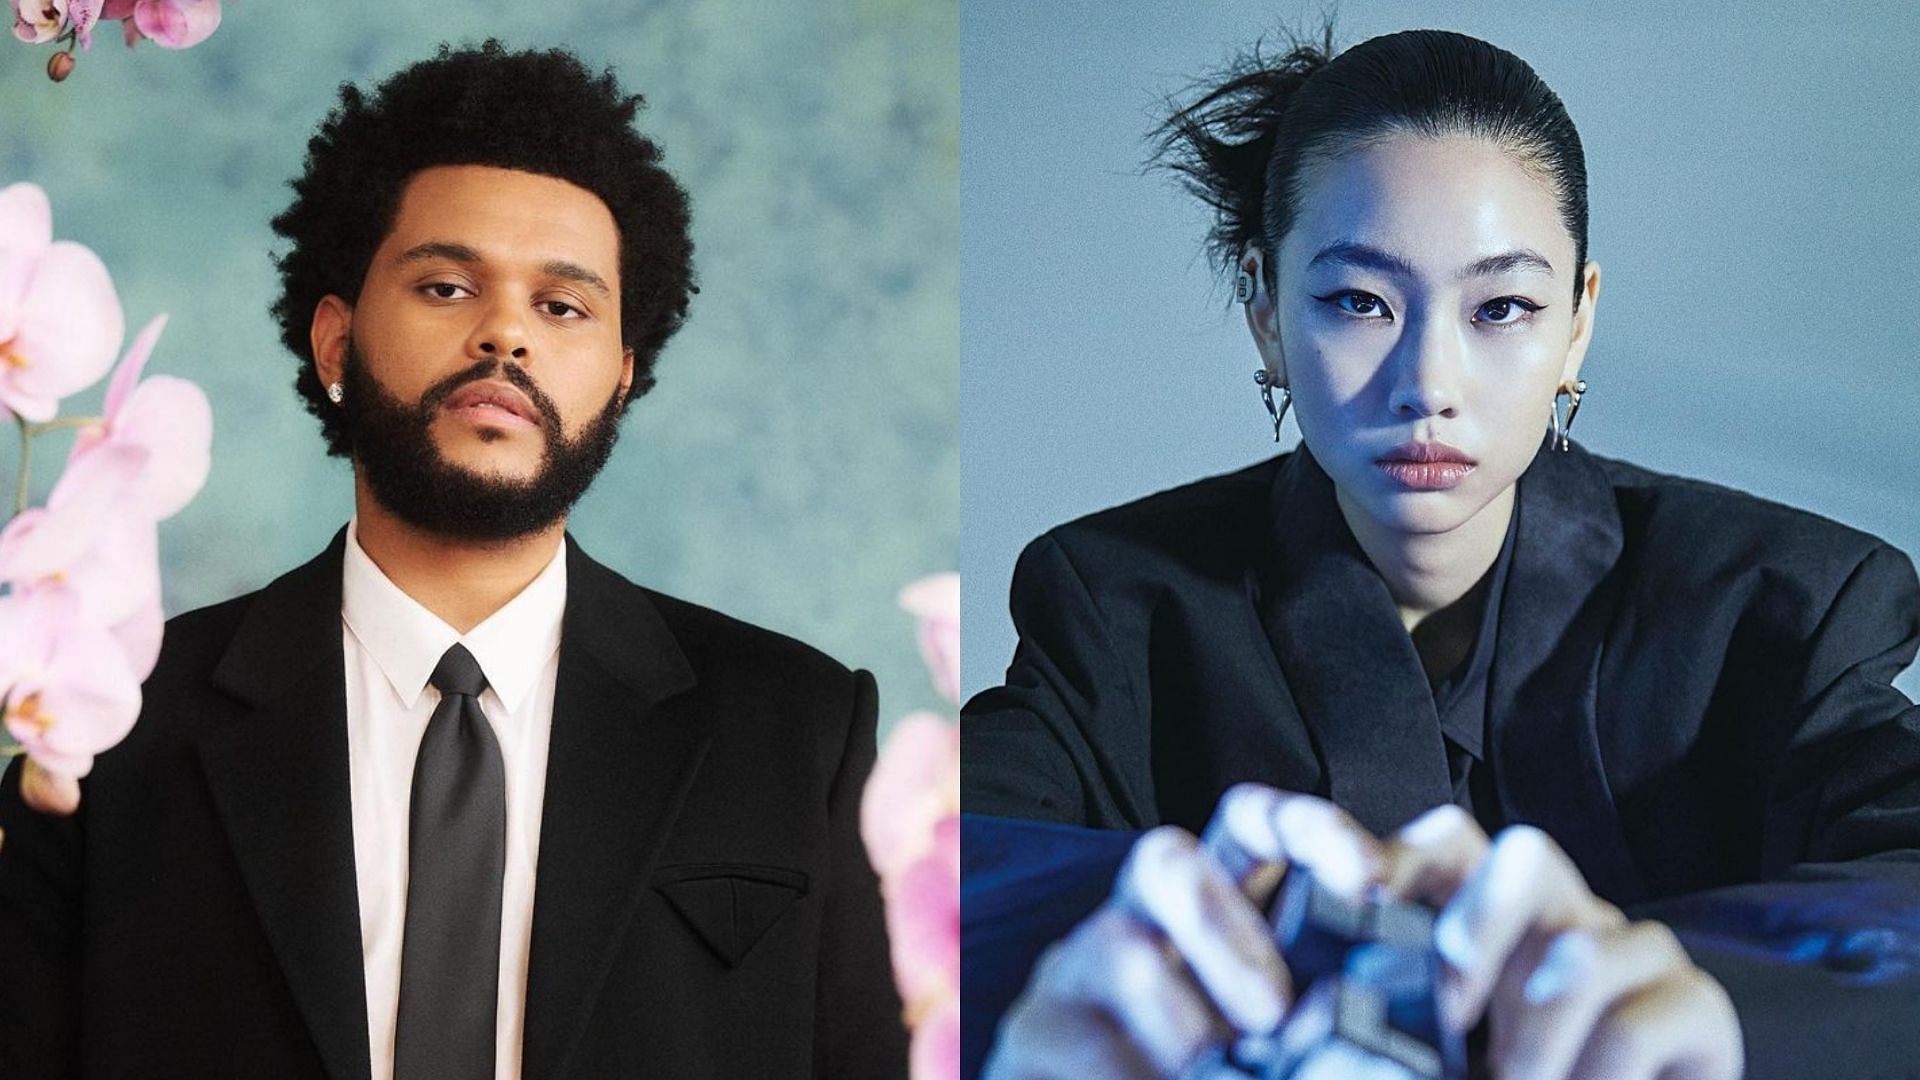 The Weeknd and Jung Ho-yeon join hands in upcoming music video collaboration (Images via @theeweeknd/Instagram and @hoooooyeony/Instagram)